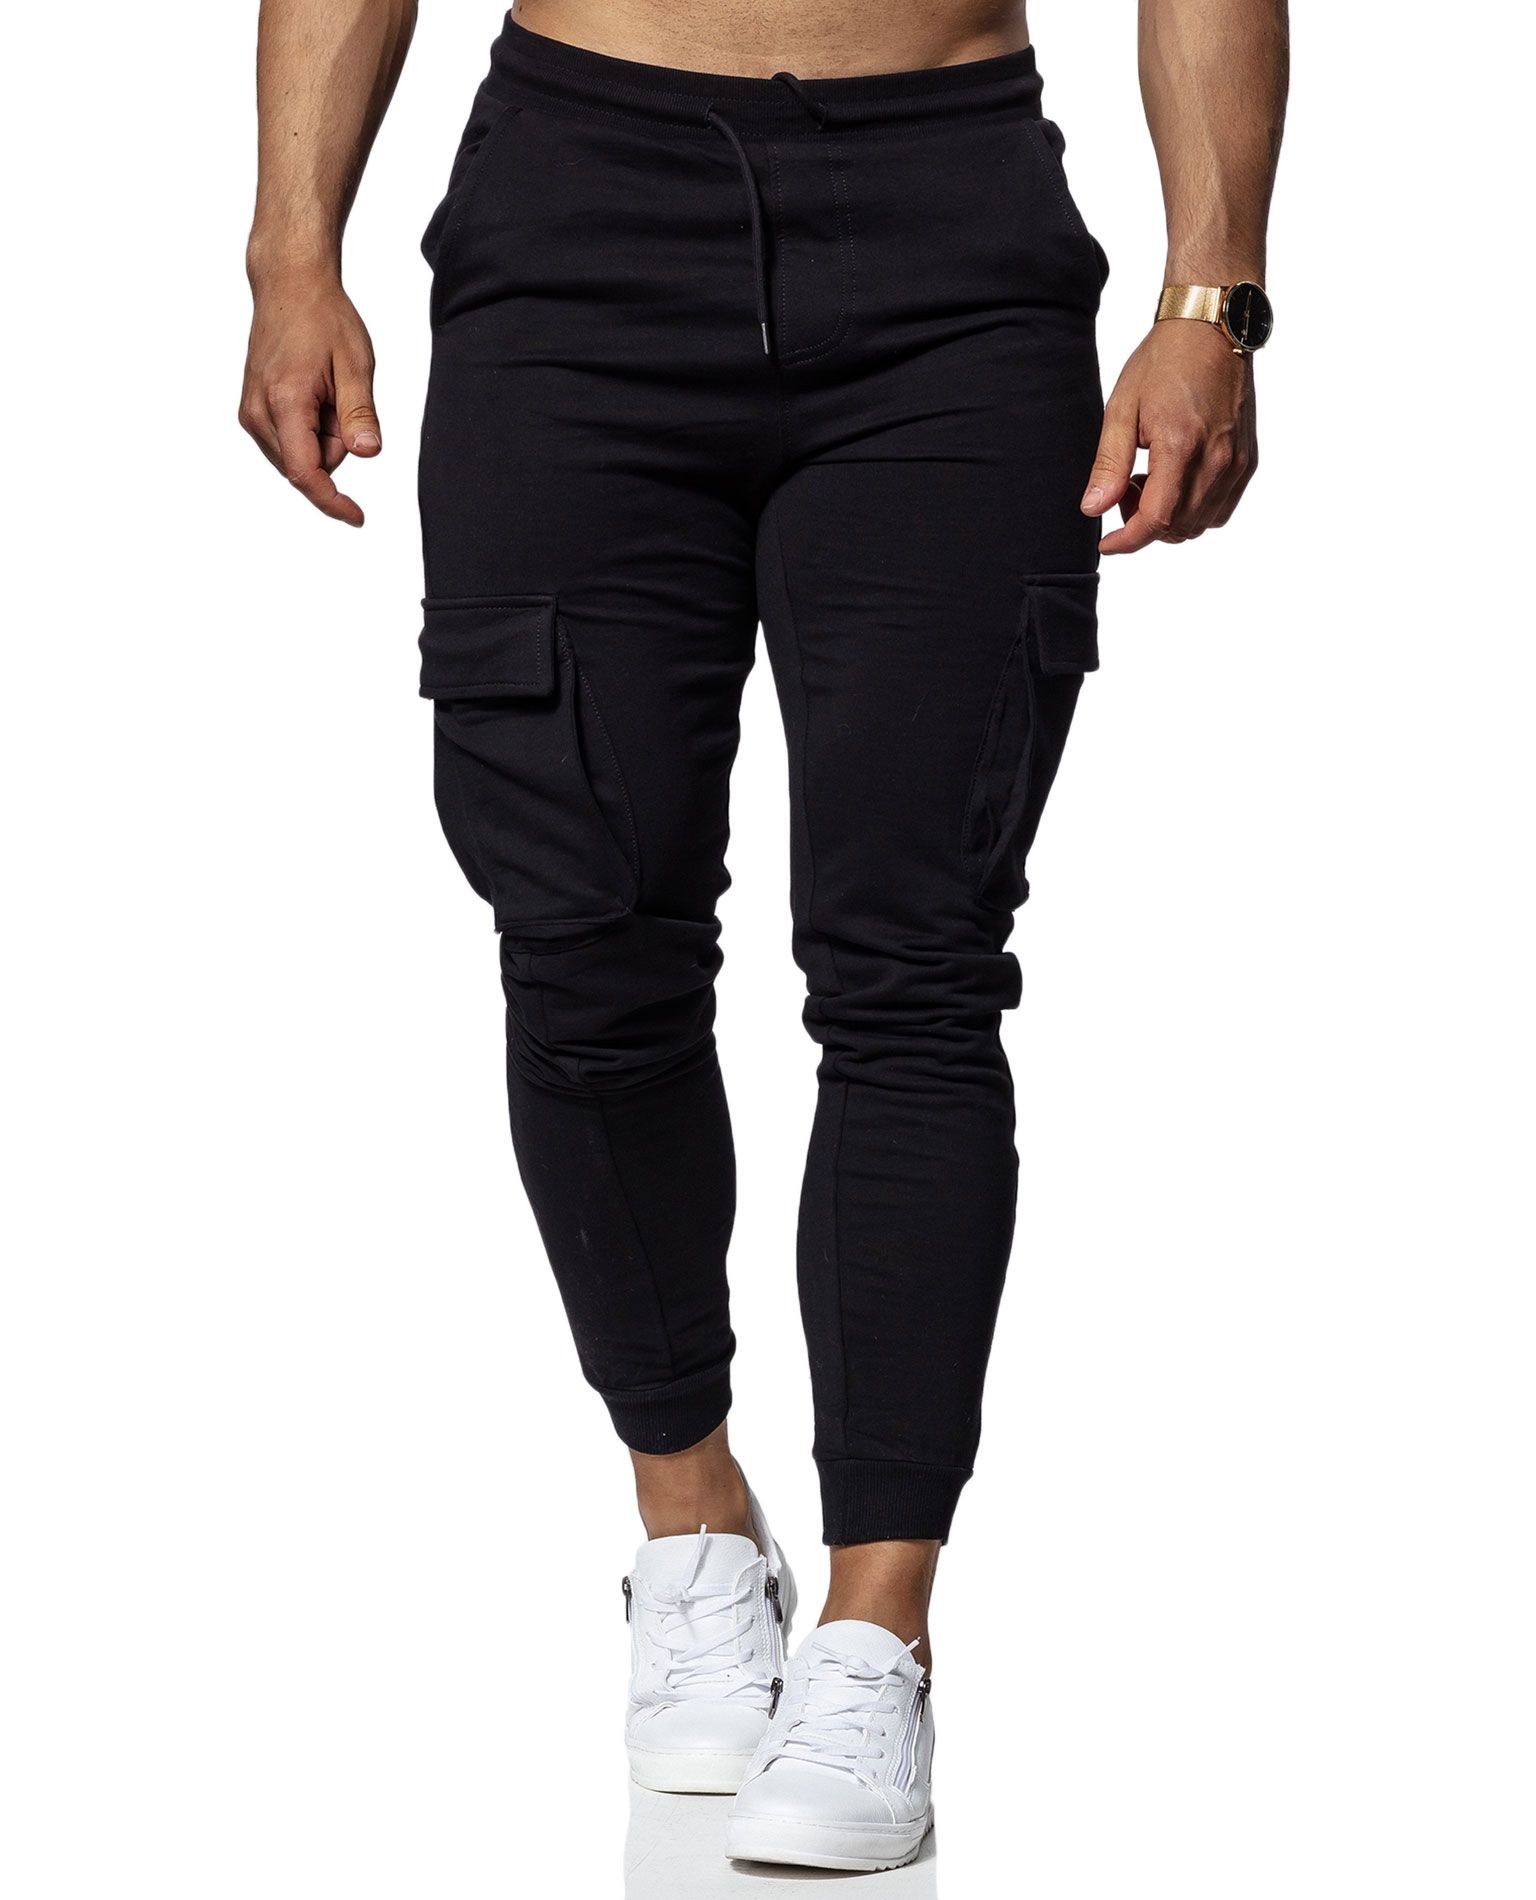 Kendrick Black College Pants Only & Sons - 9485 - Trousers - Jerone.com